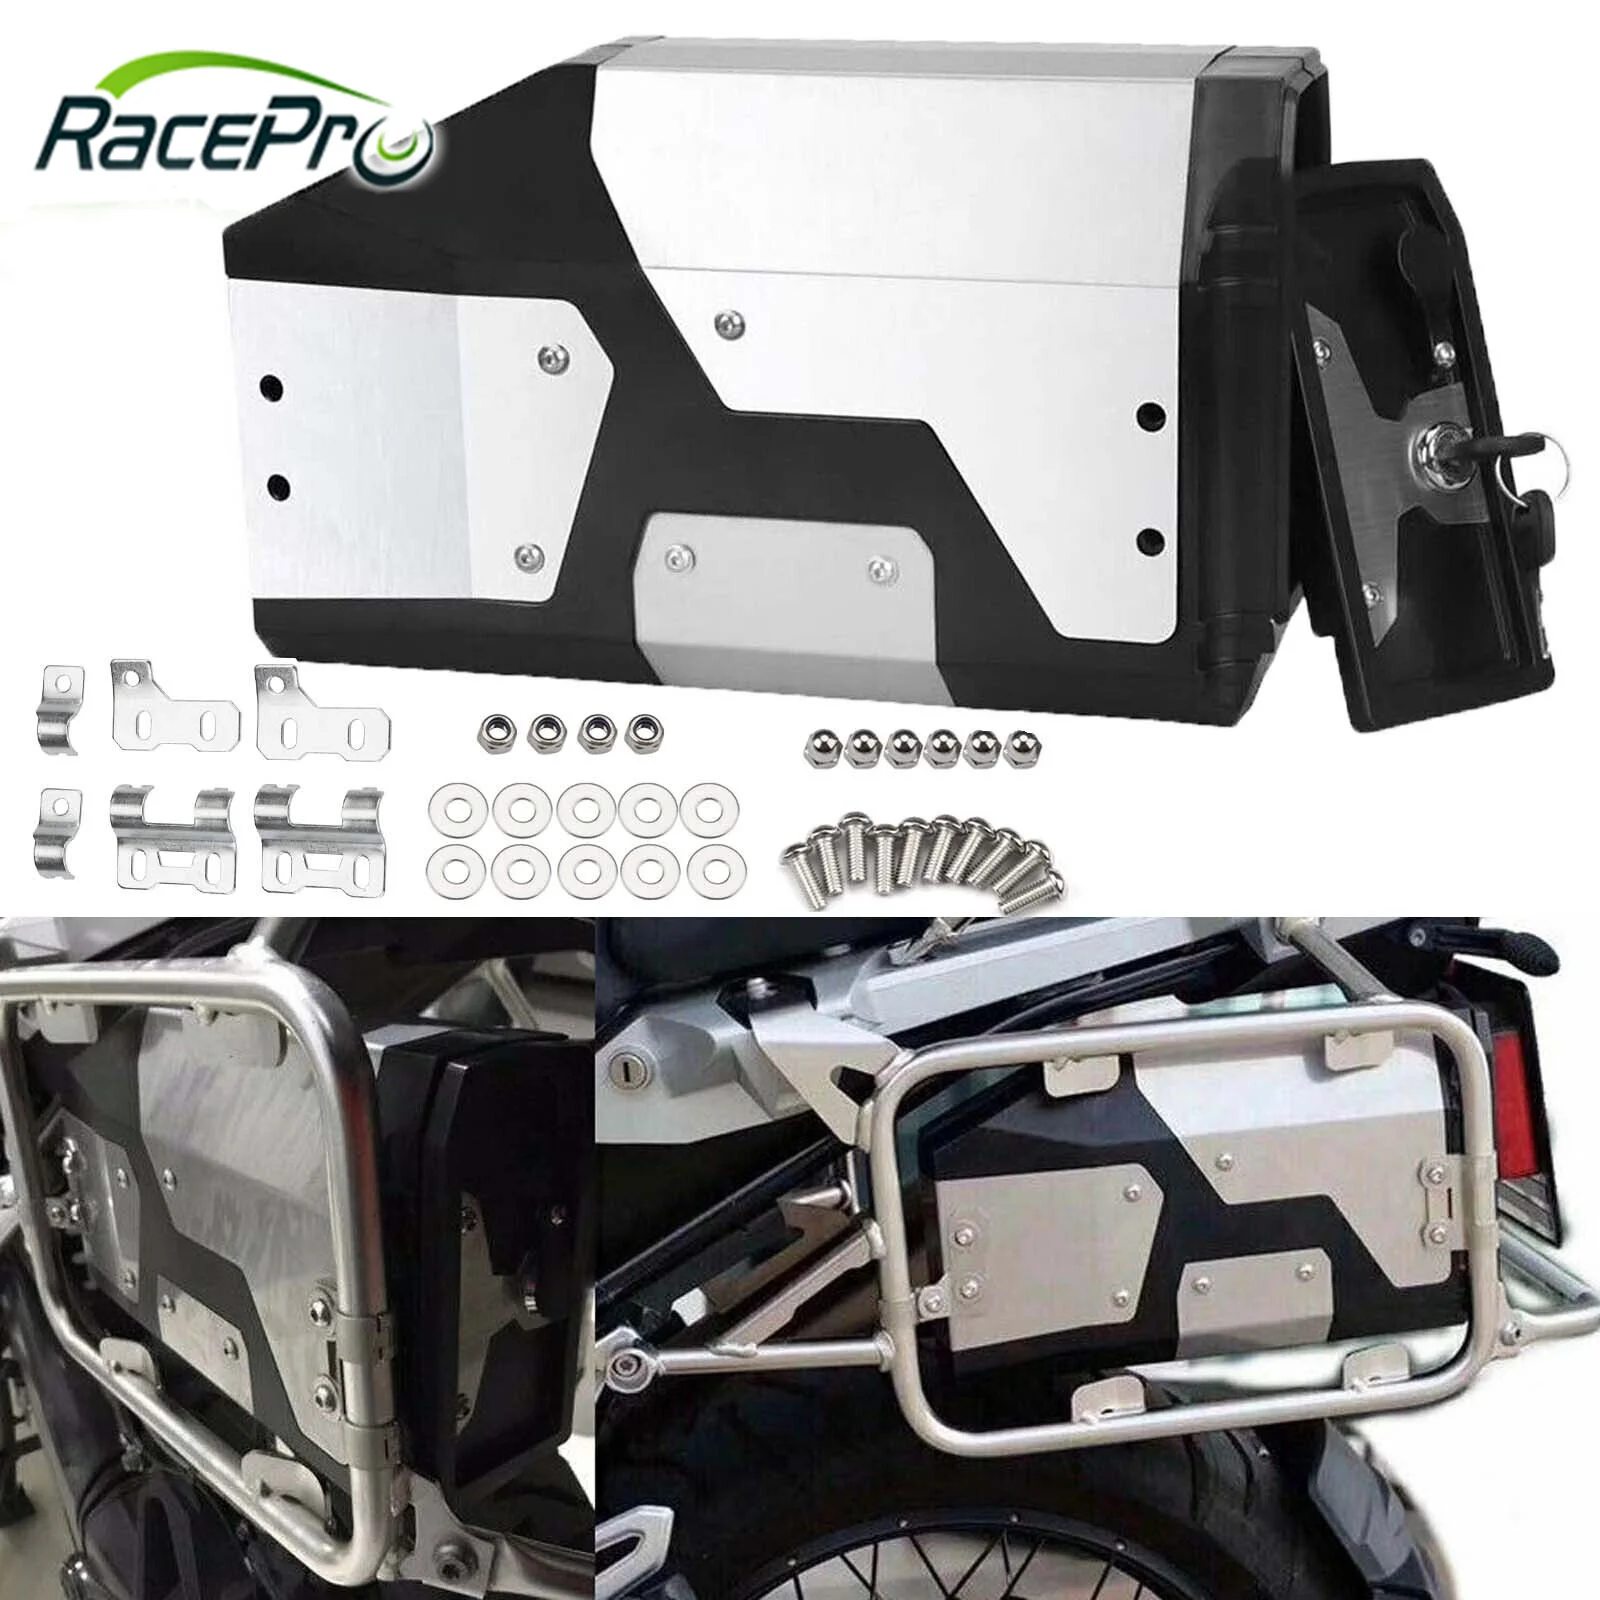 RACEPRO ONE-STOP Shop Europe R1250 GS Motorcycle Accessories For BMW R1250GS R 1250 GS GSA R1250GSA Adventure ADV